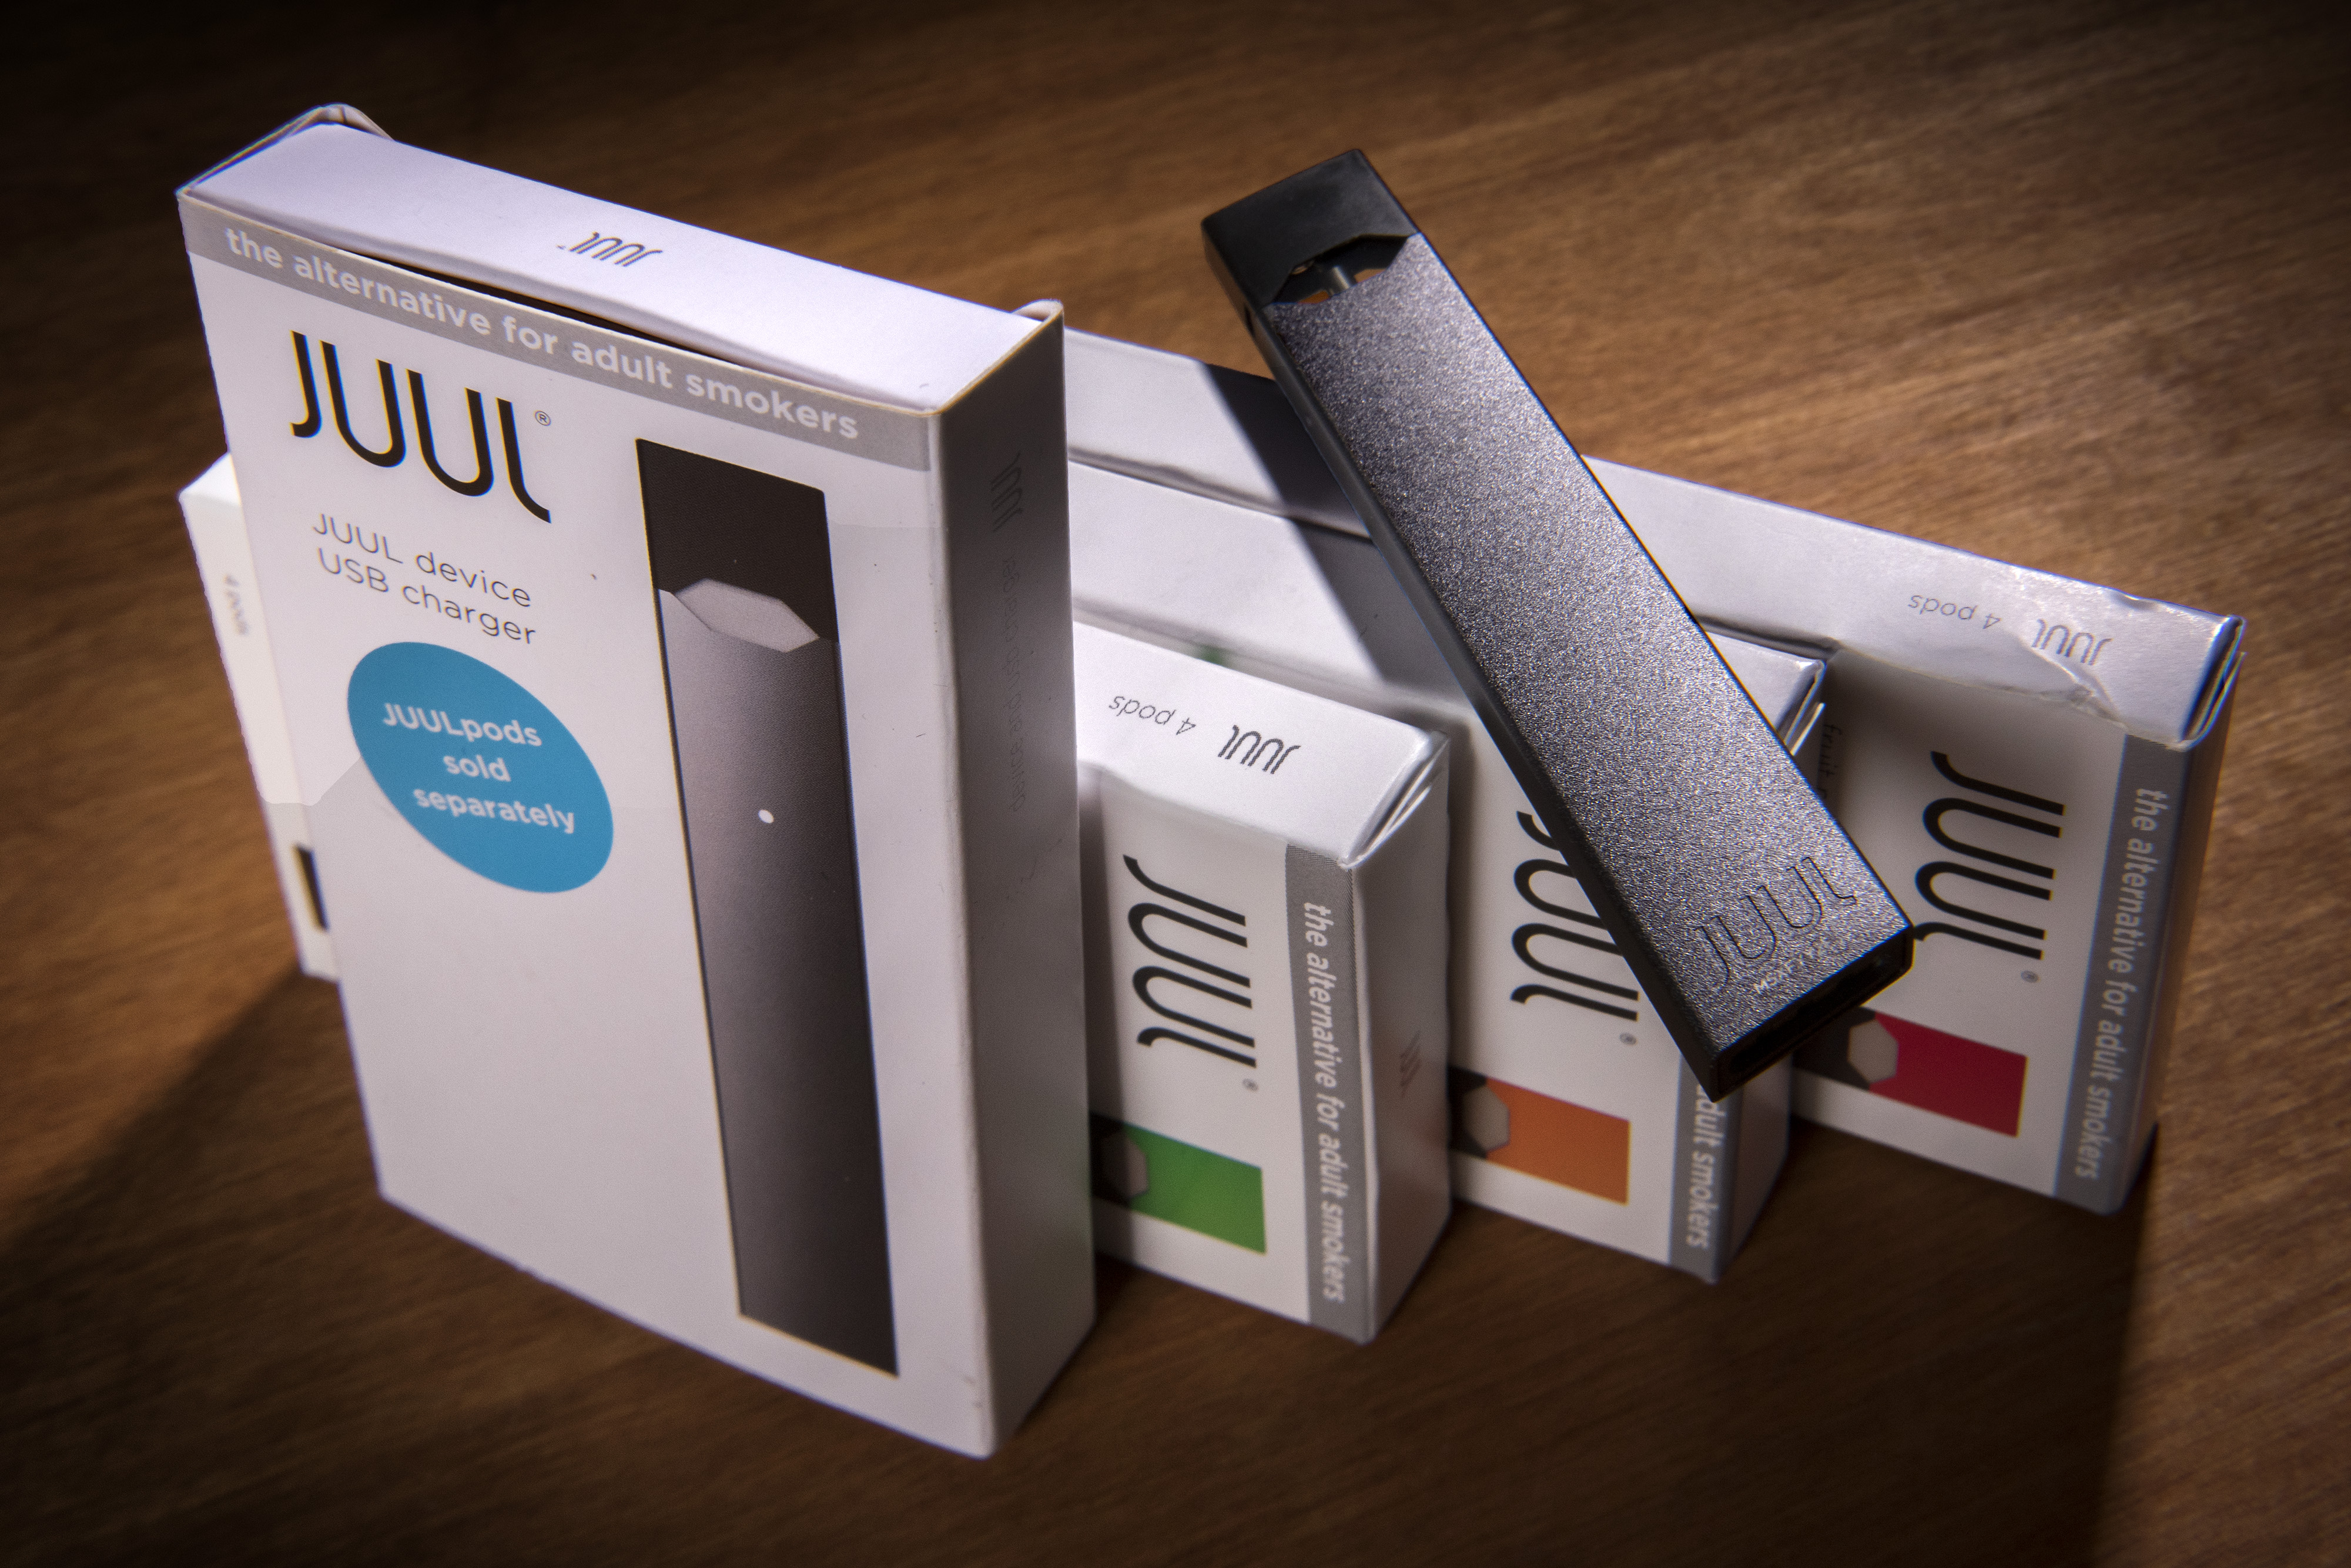 A Juul vaping system with accessory pods in varying flavors on May, 02, 2018 in Washington, DC. (The Washington Post&mdash;The Washington Post/Getty Images)